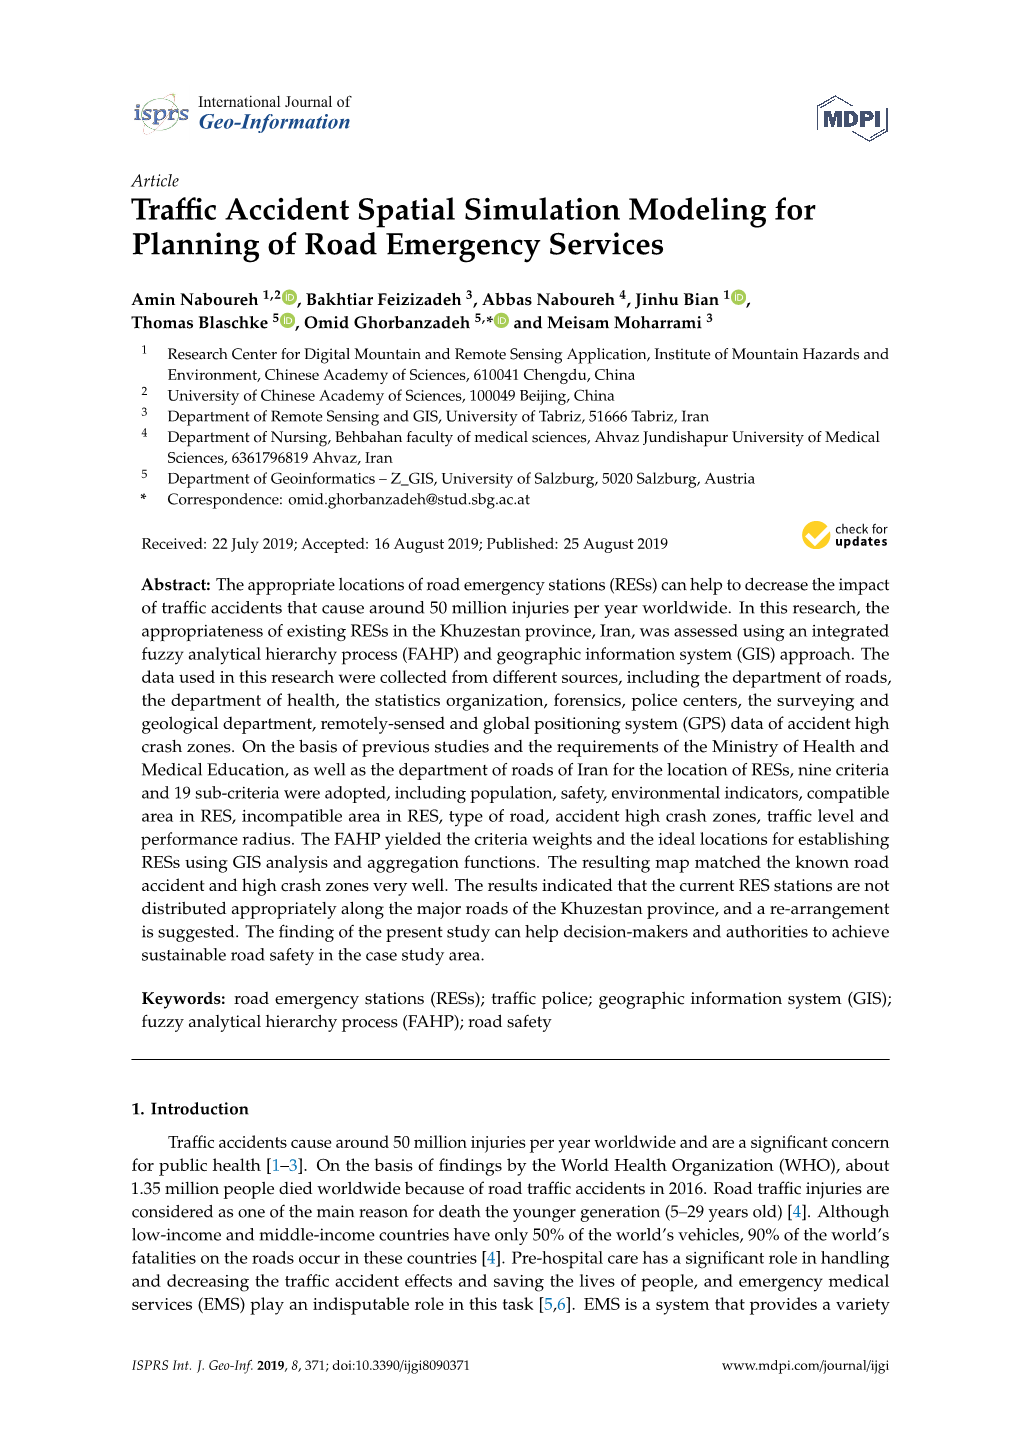 Traffic Accident Spatial Simulation Modeling for Planning of Road